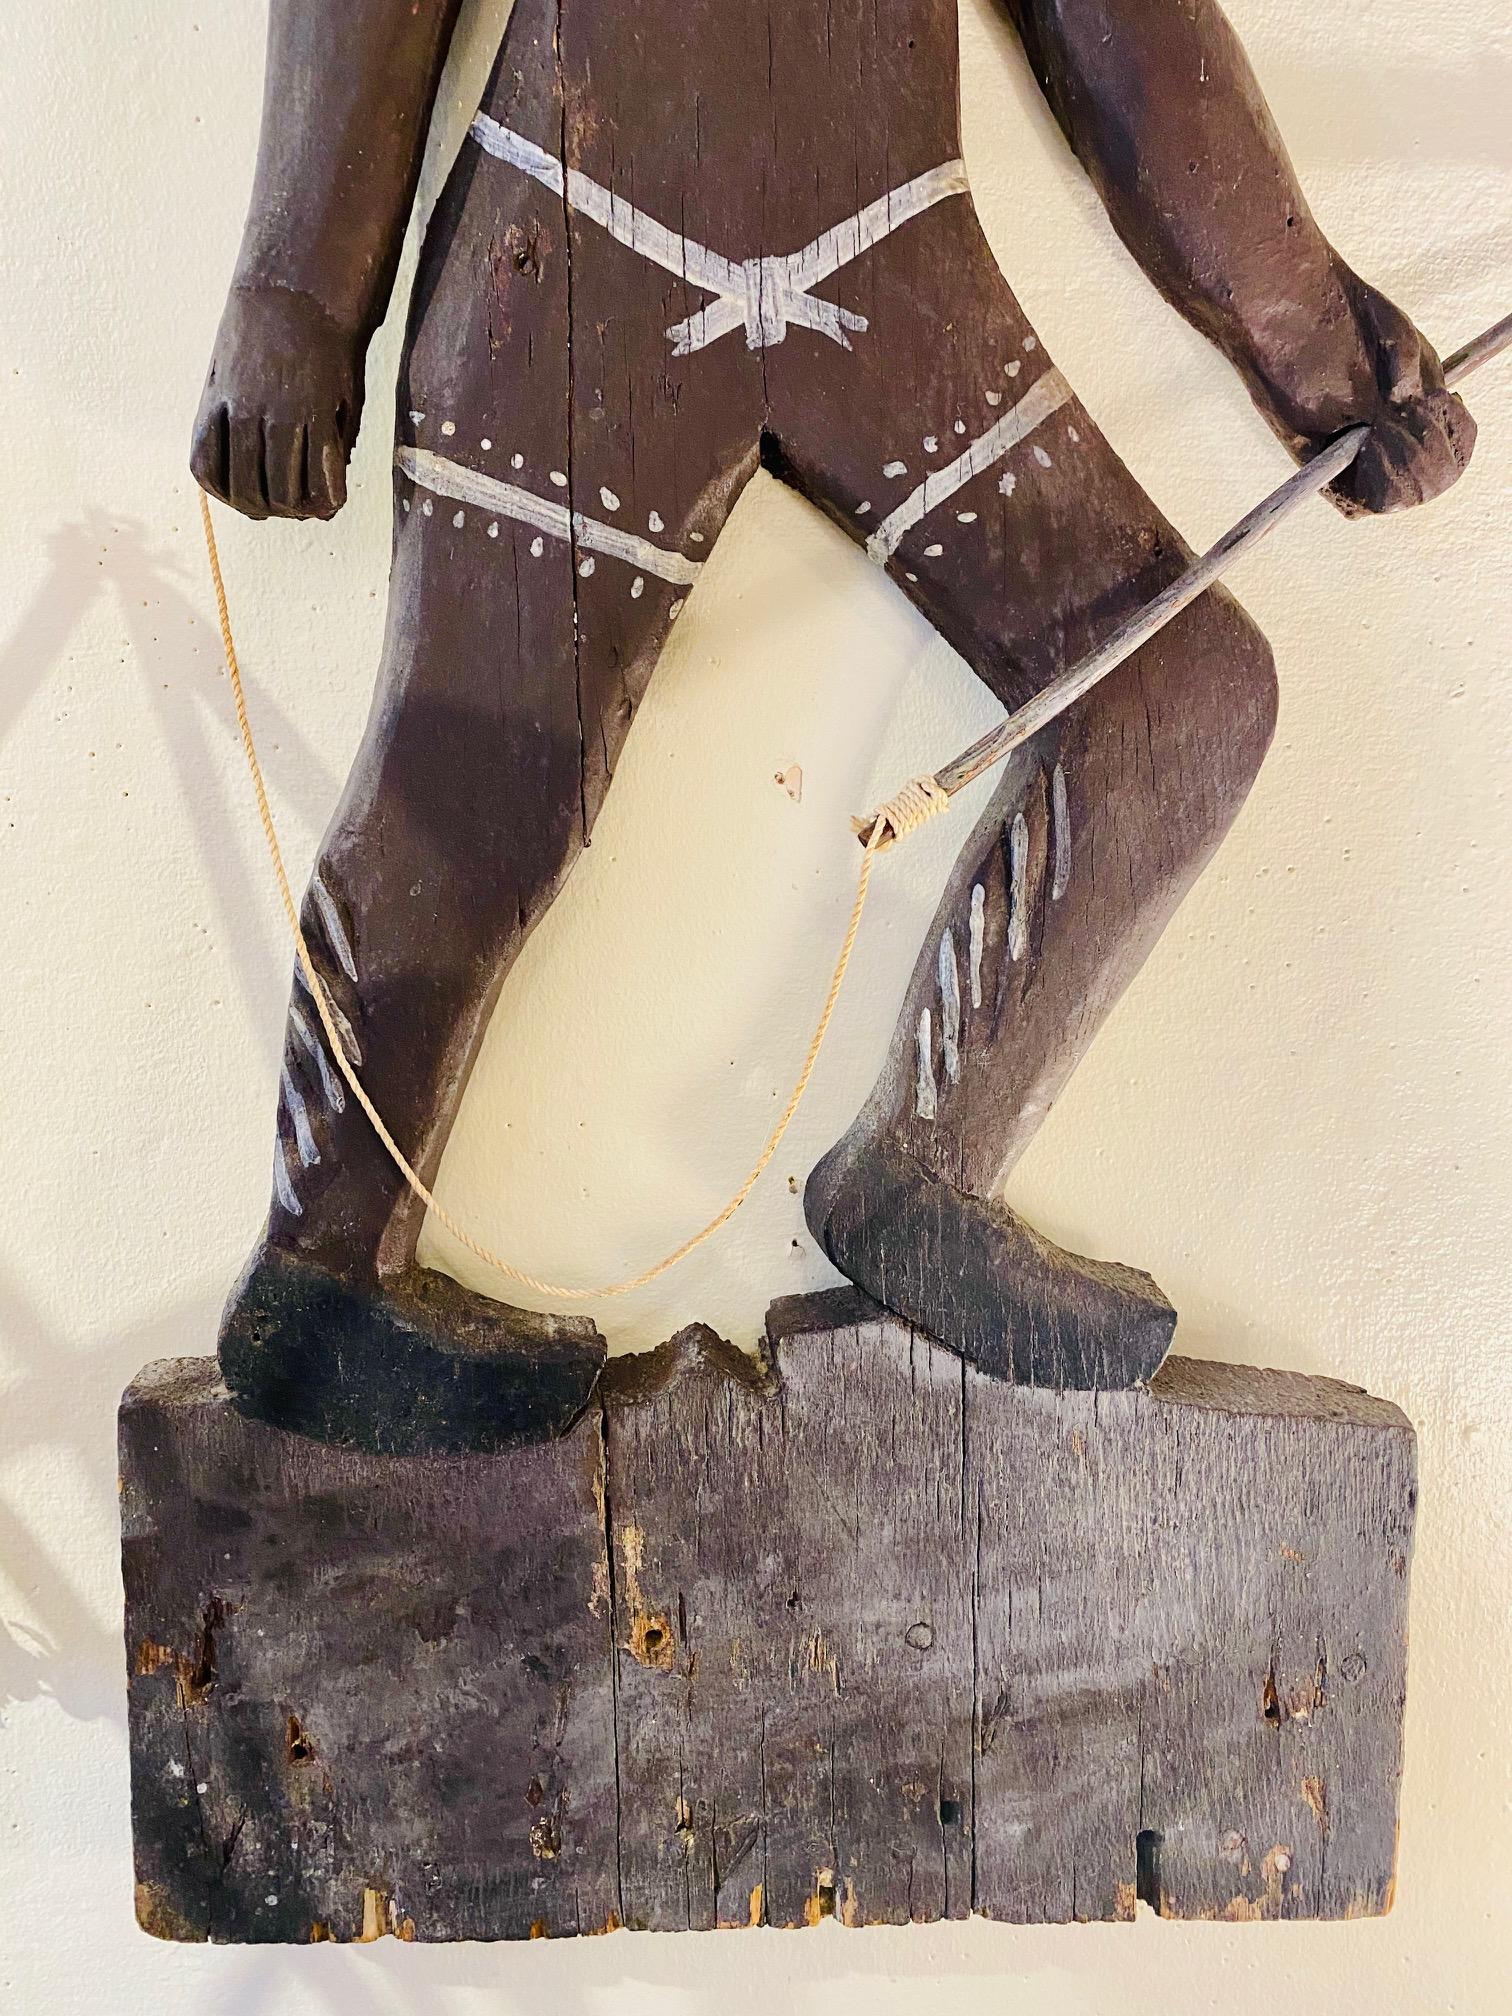 Folk Art Carved and Decorated Plaque of Tashtego, early to mid-20th century, a flat carved panel image of a Native American man, with feather headdress, tattoos and jewelry, bearing a harpoon with line. The image can only be that of Tashtego, the